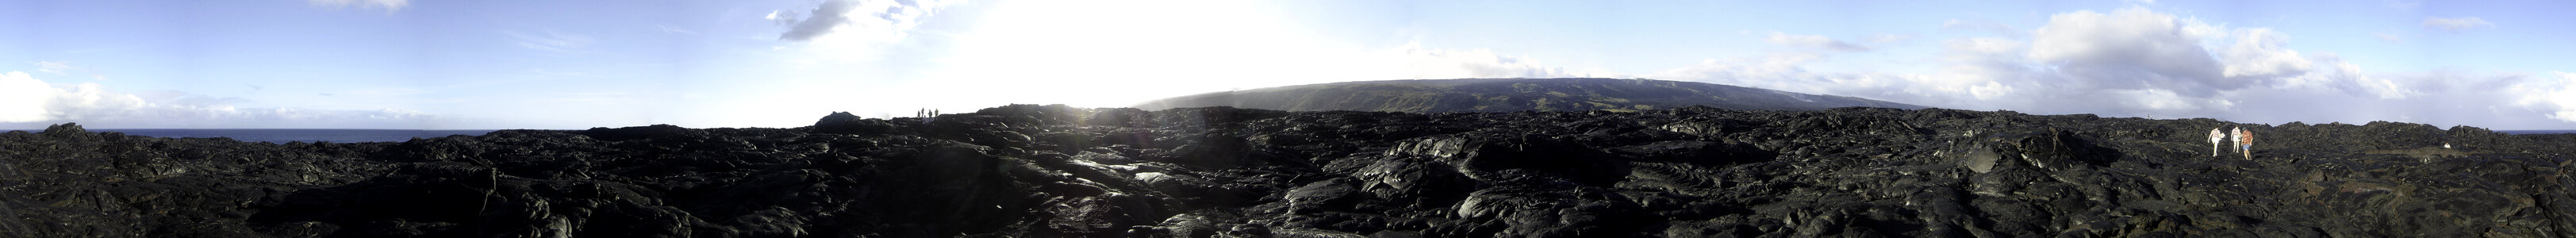 Panoramic View of Lava field in Hawaii Volcanoes National Park photo